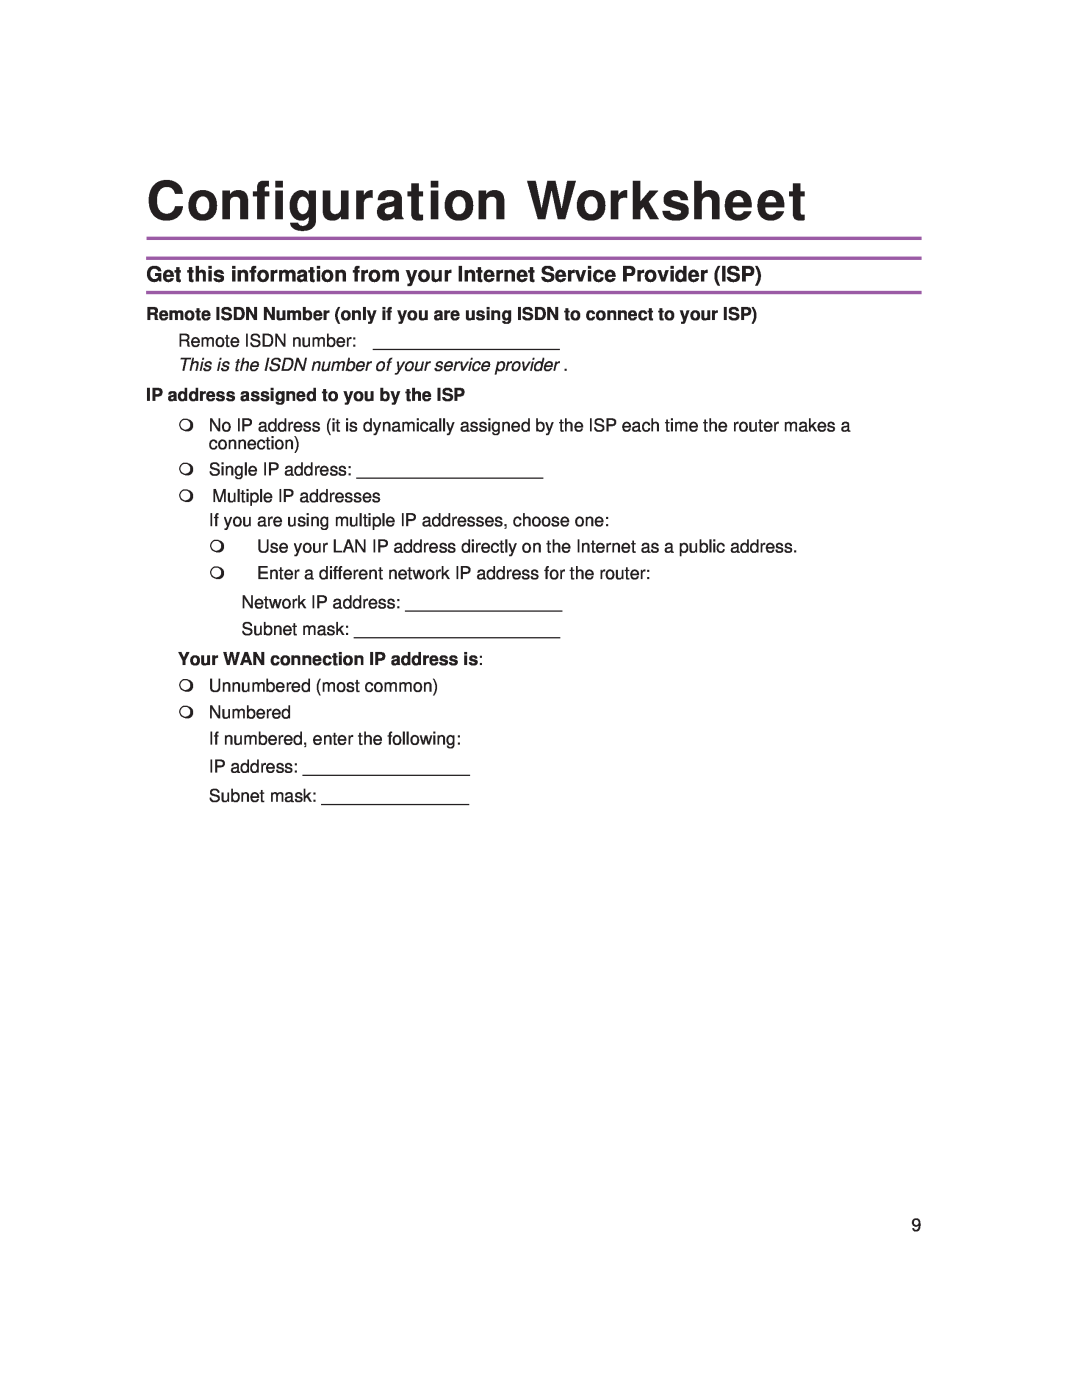 Intel 9545 Configuration Worksheet, This is the ISDN number of your service provider, Your WAN connection IP address is 